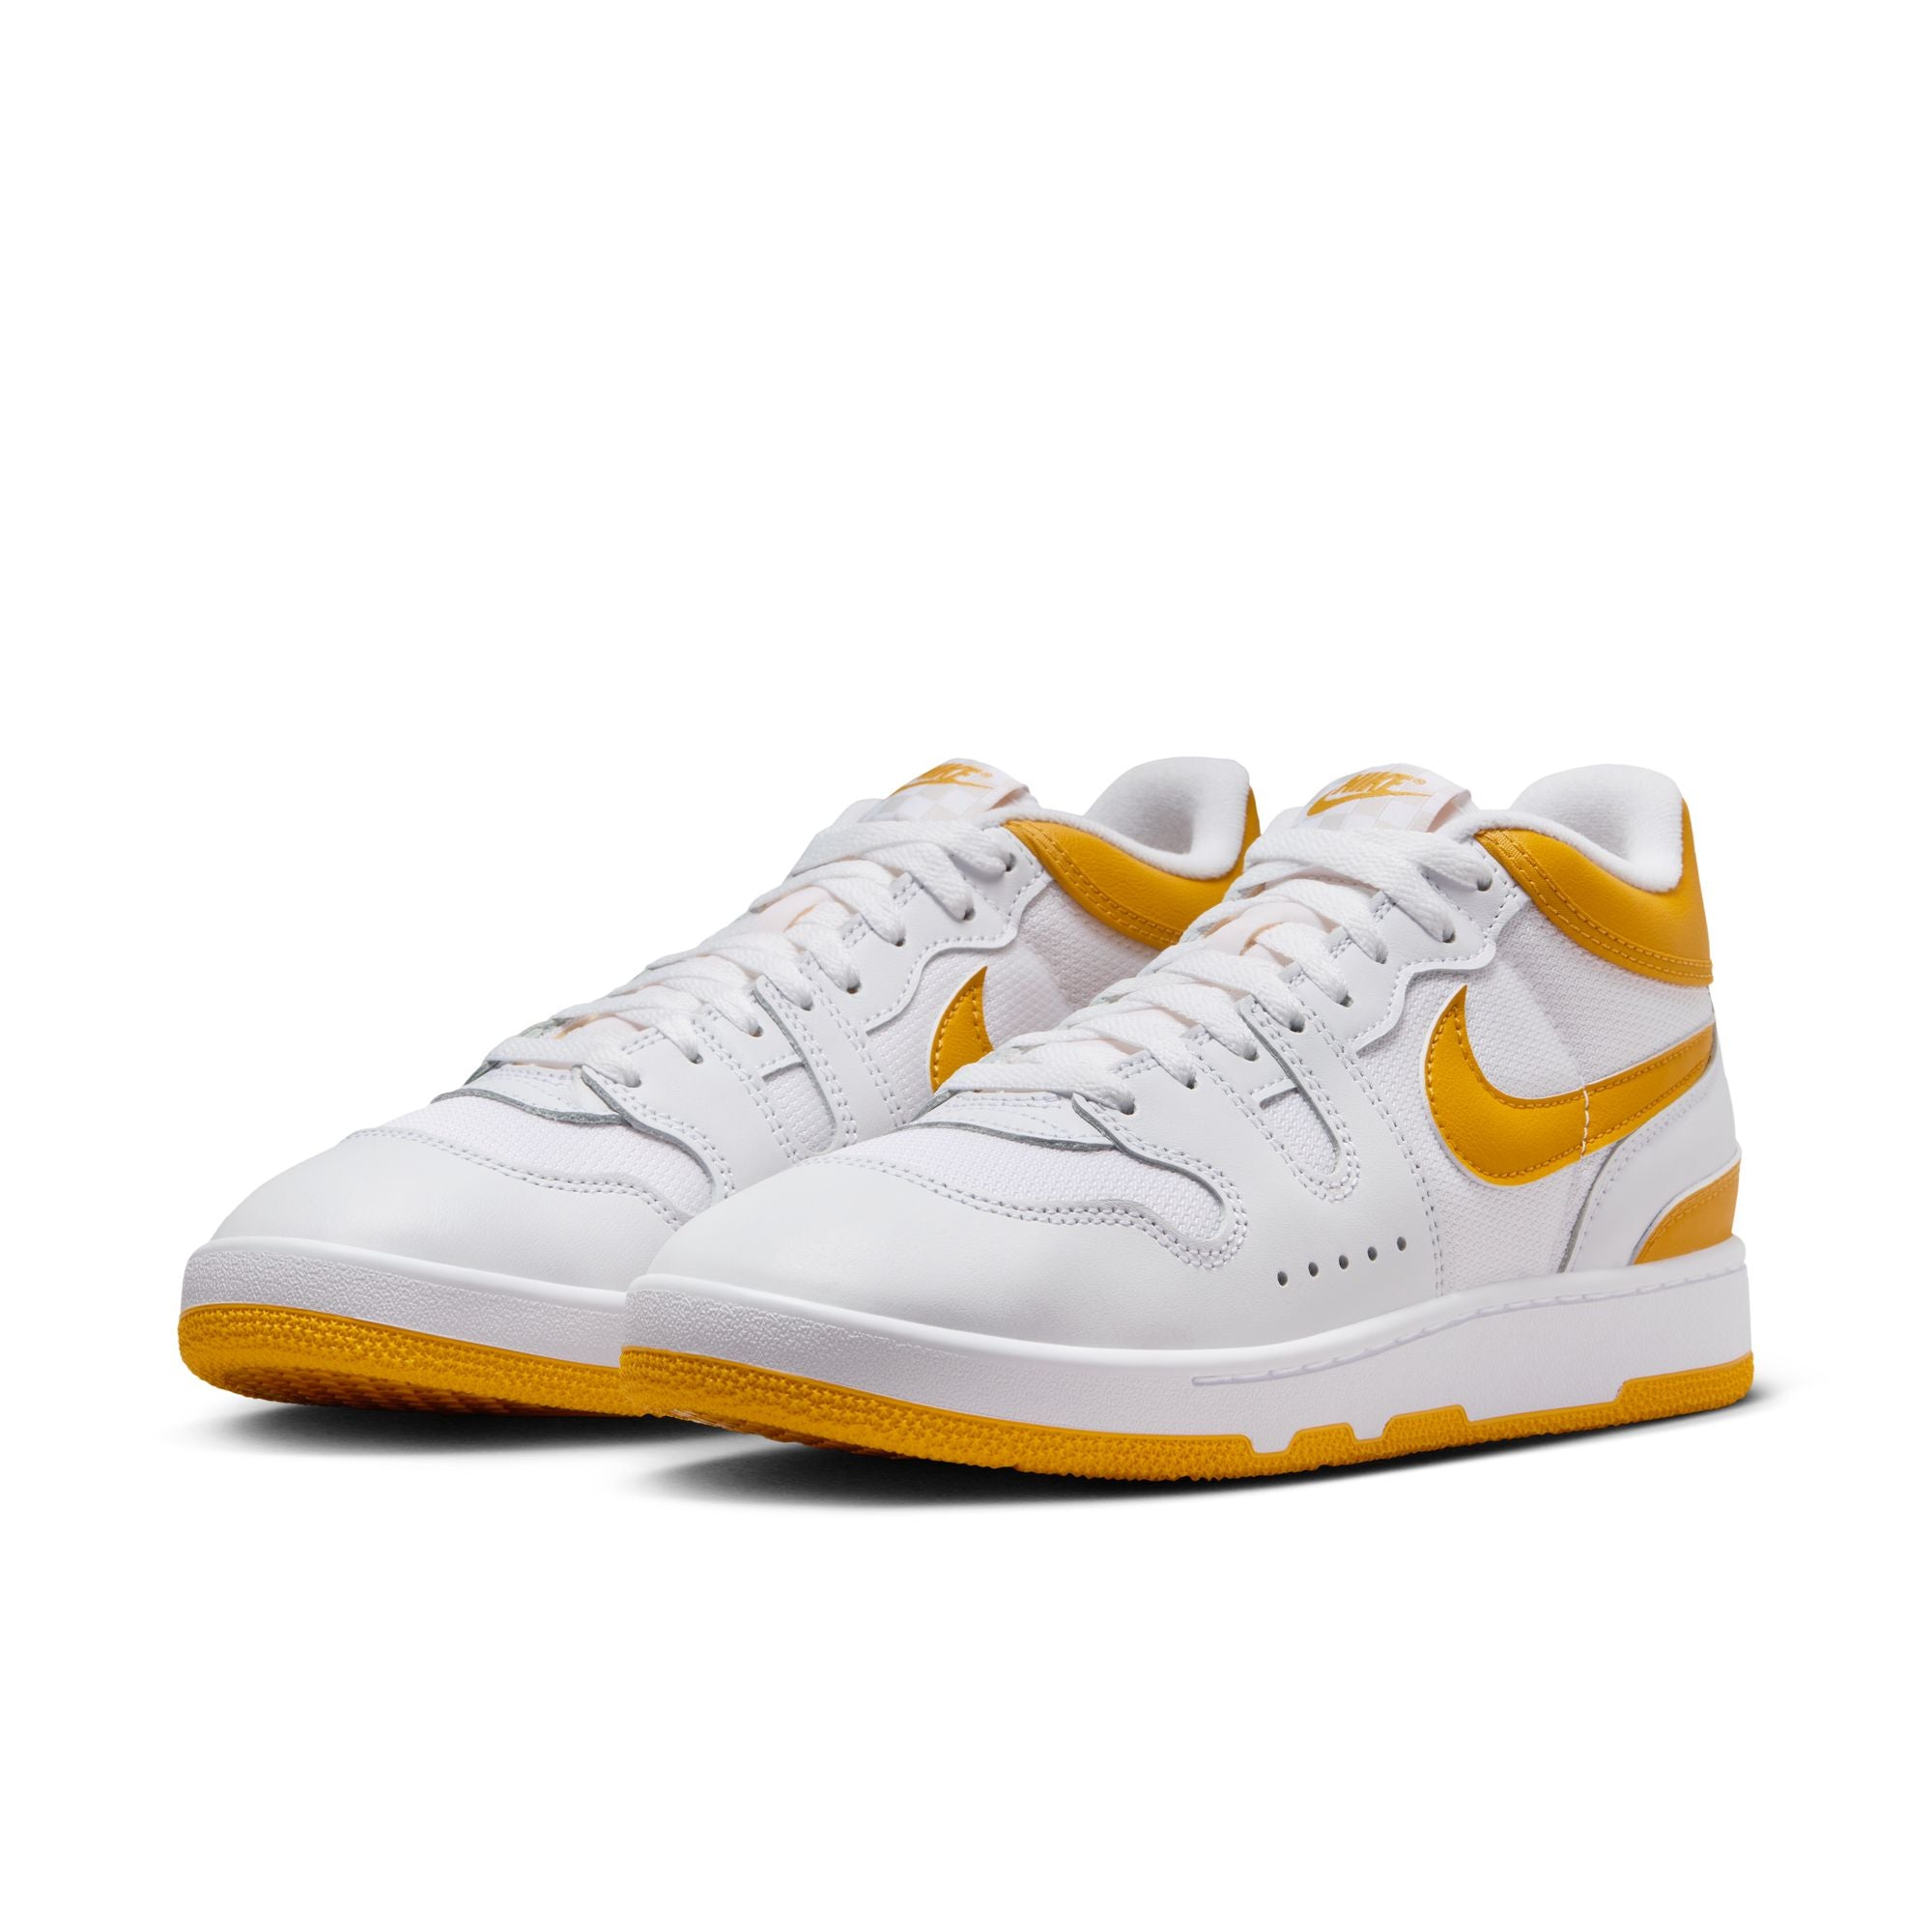 Nike Attack QS SP